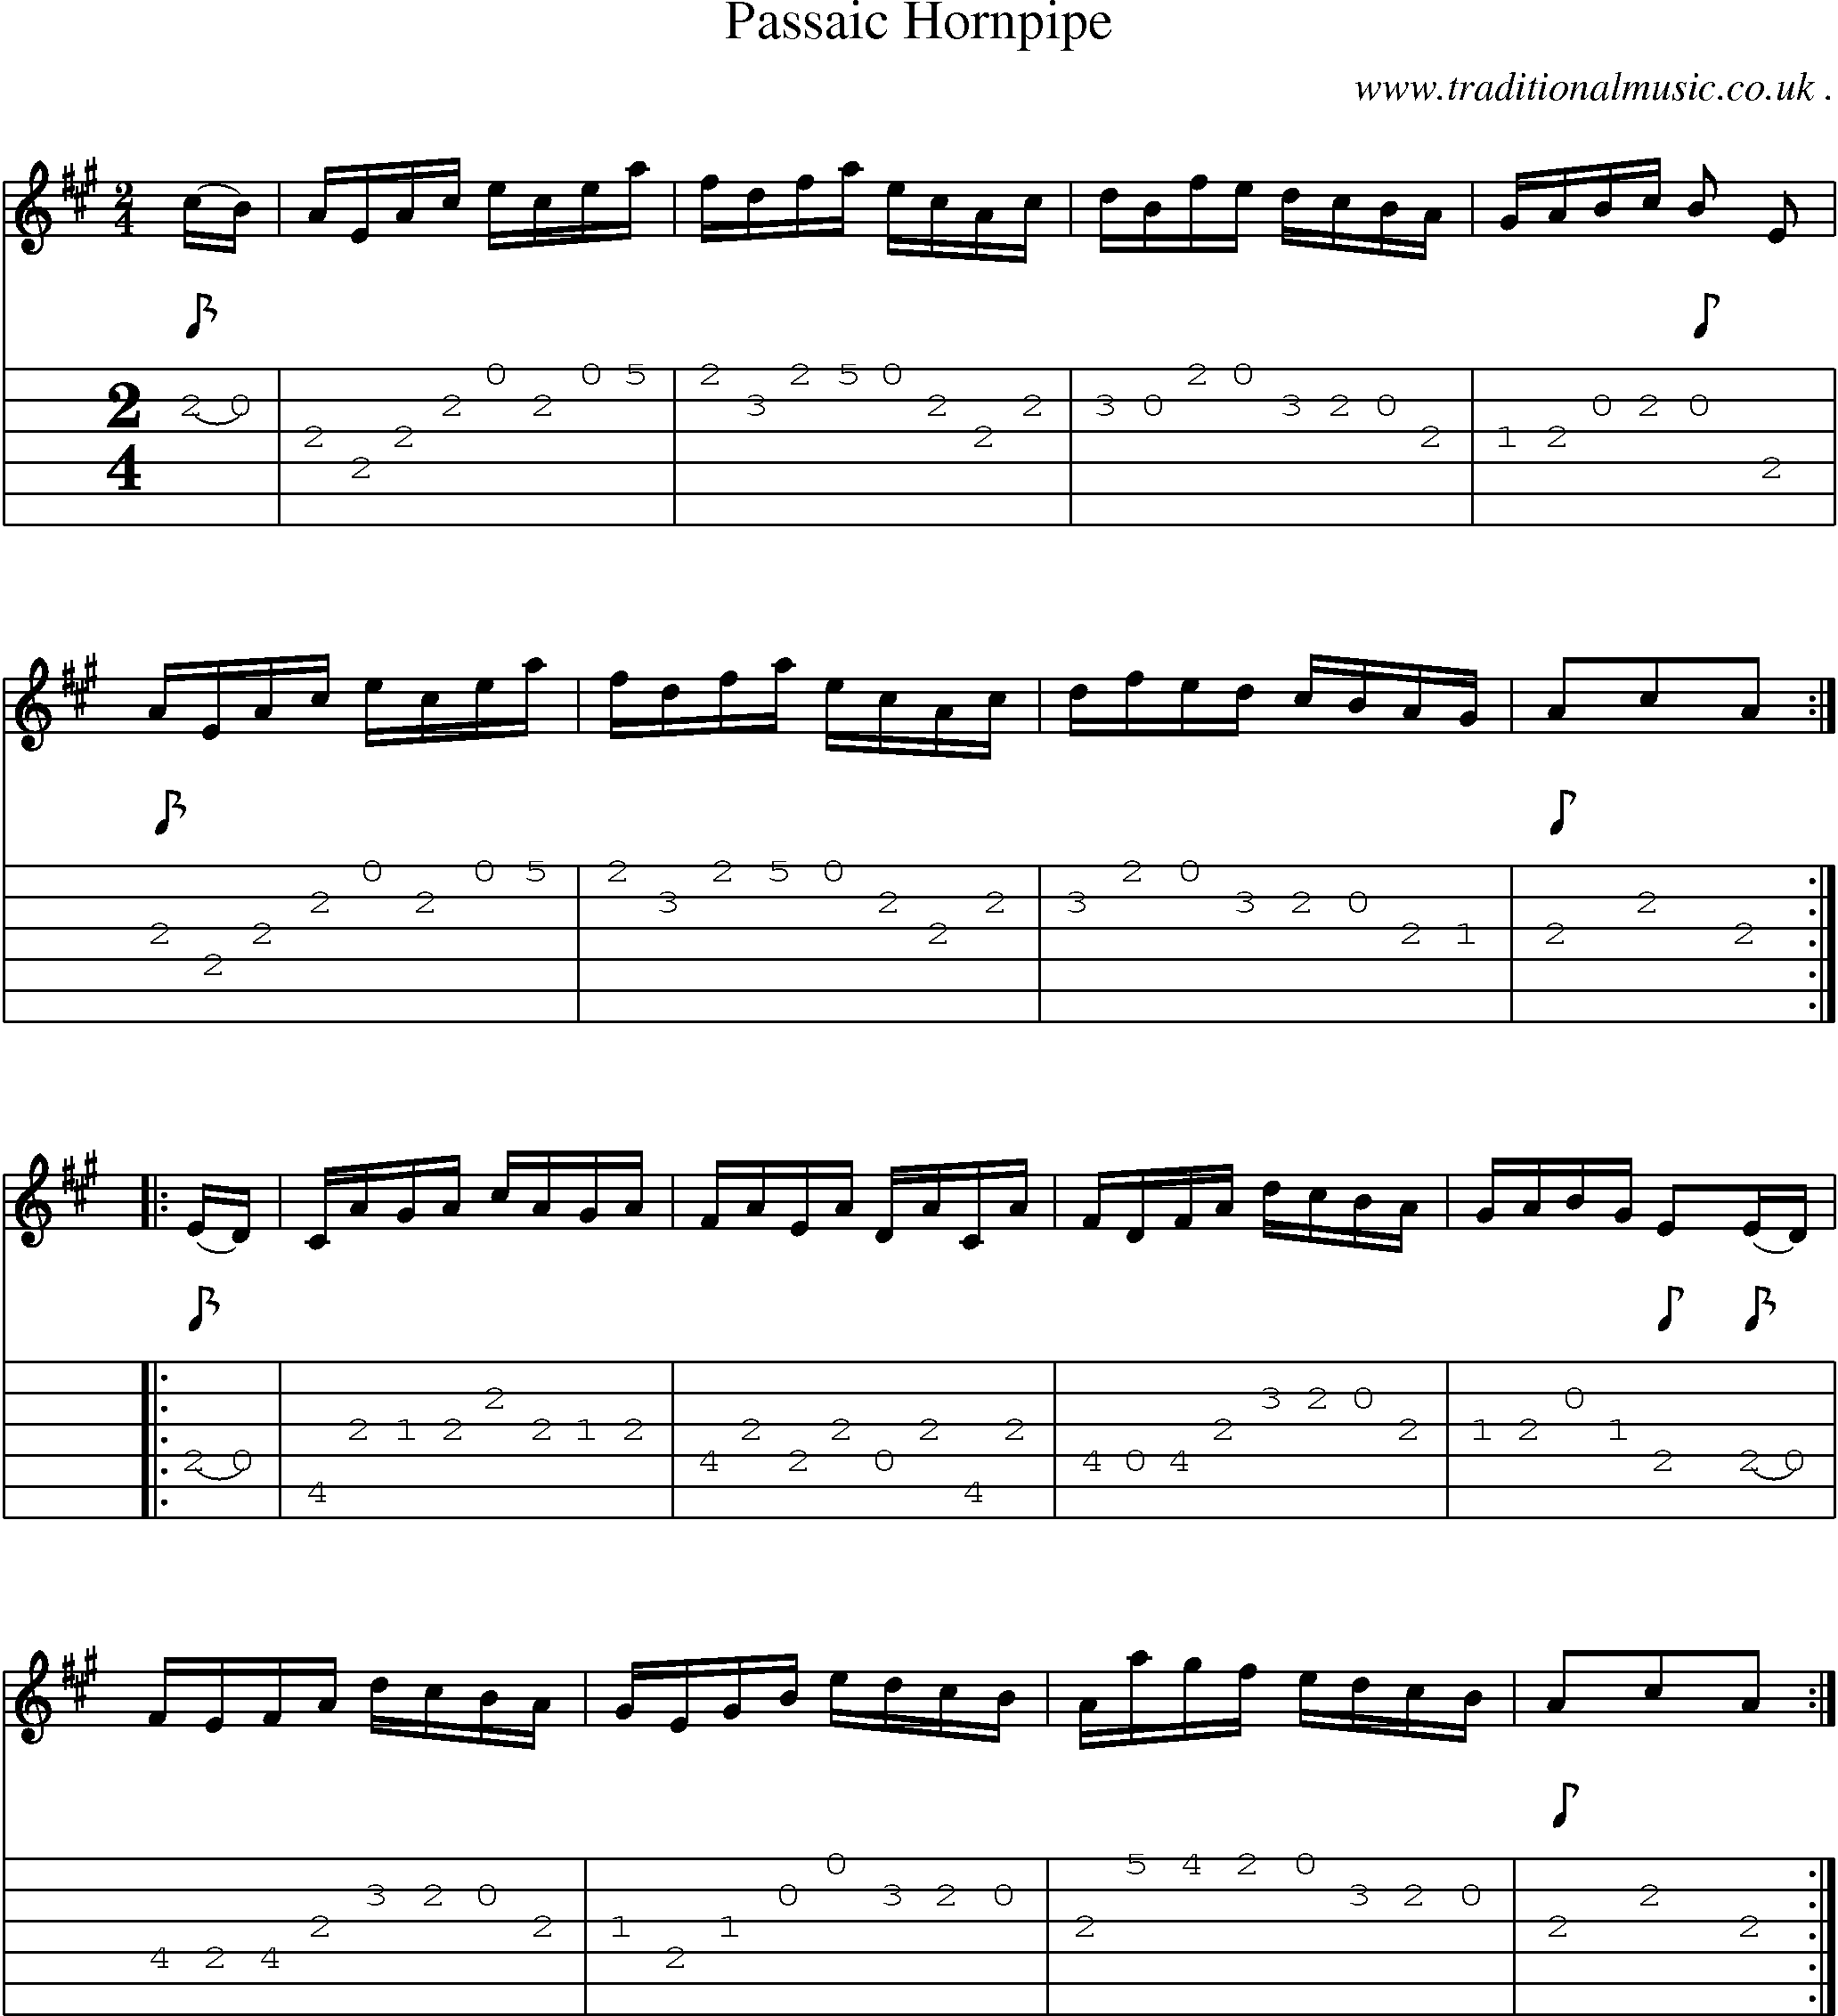 Sheet-Music and Guitar Tabs for Passaic Hornpipe